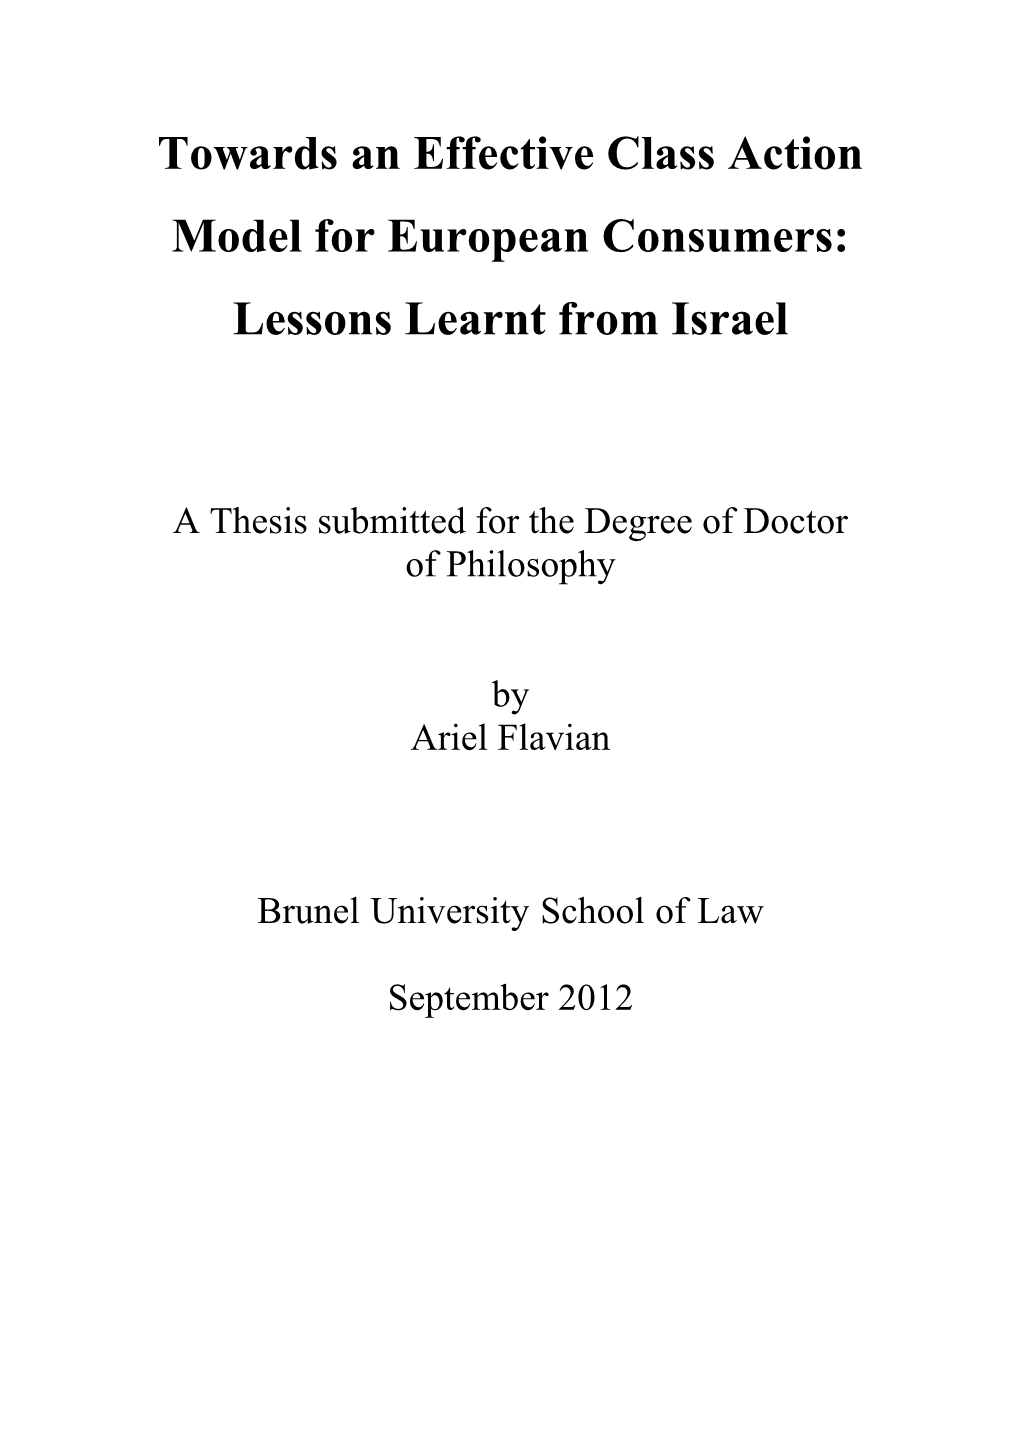 Towards an Effective Class Action Model for European Consumers: Lessons Learnt from Israel